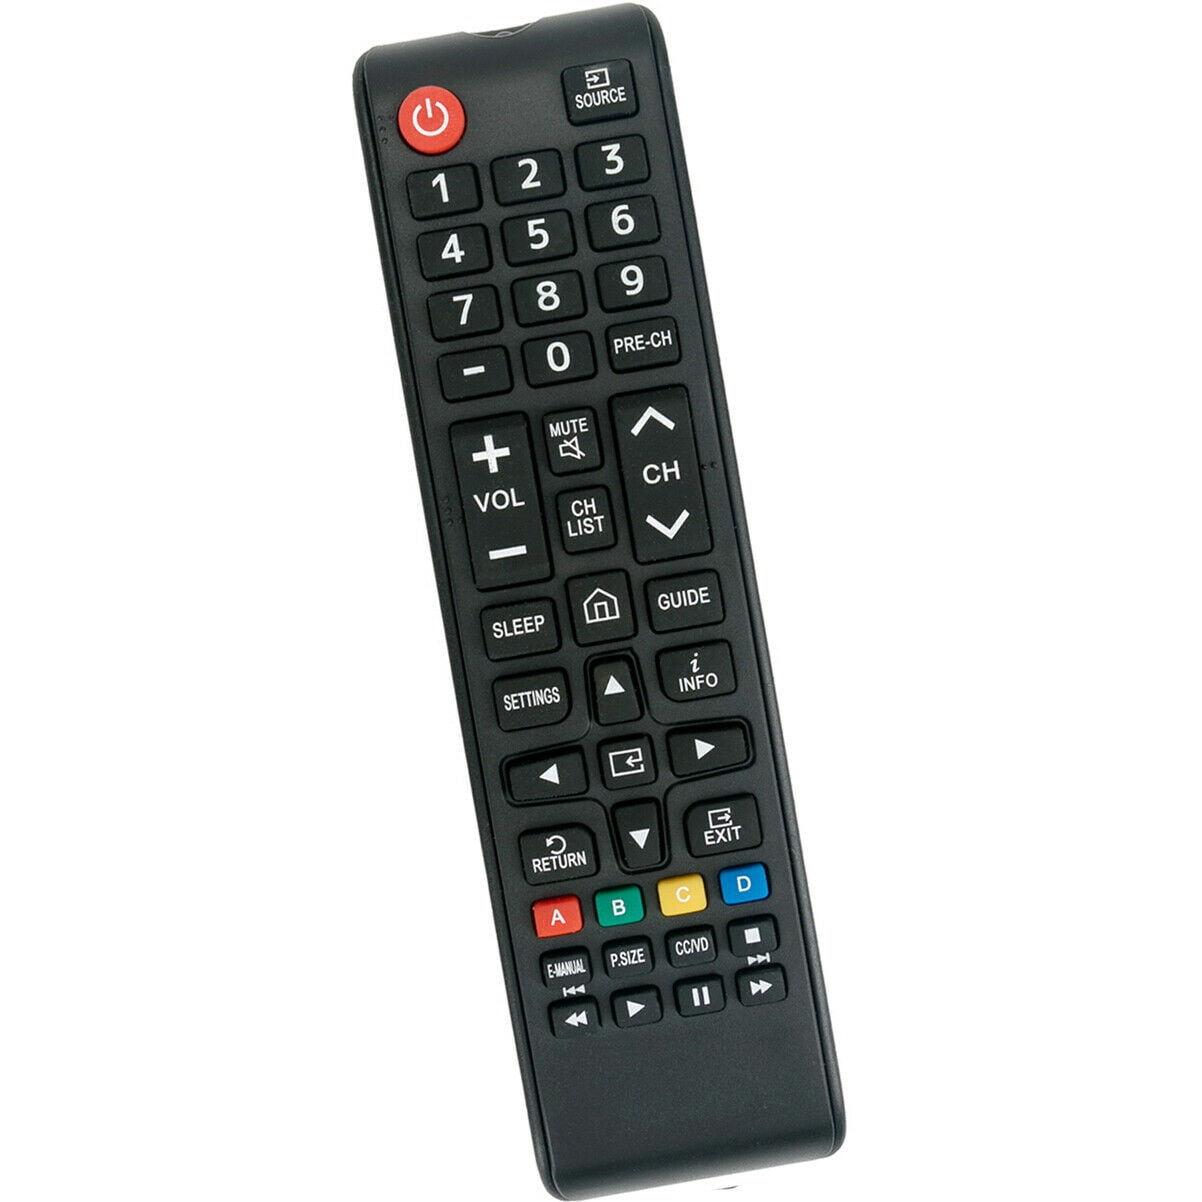 HW-MS750 OEM Samsung Remote Control Shipped with HWMS6500 HW-MS6500 HWMS750